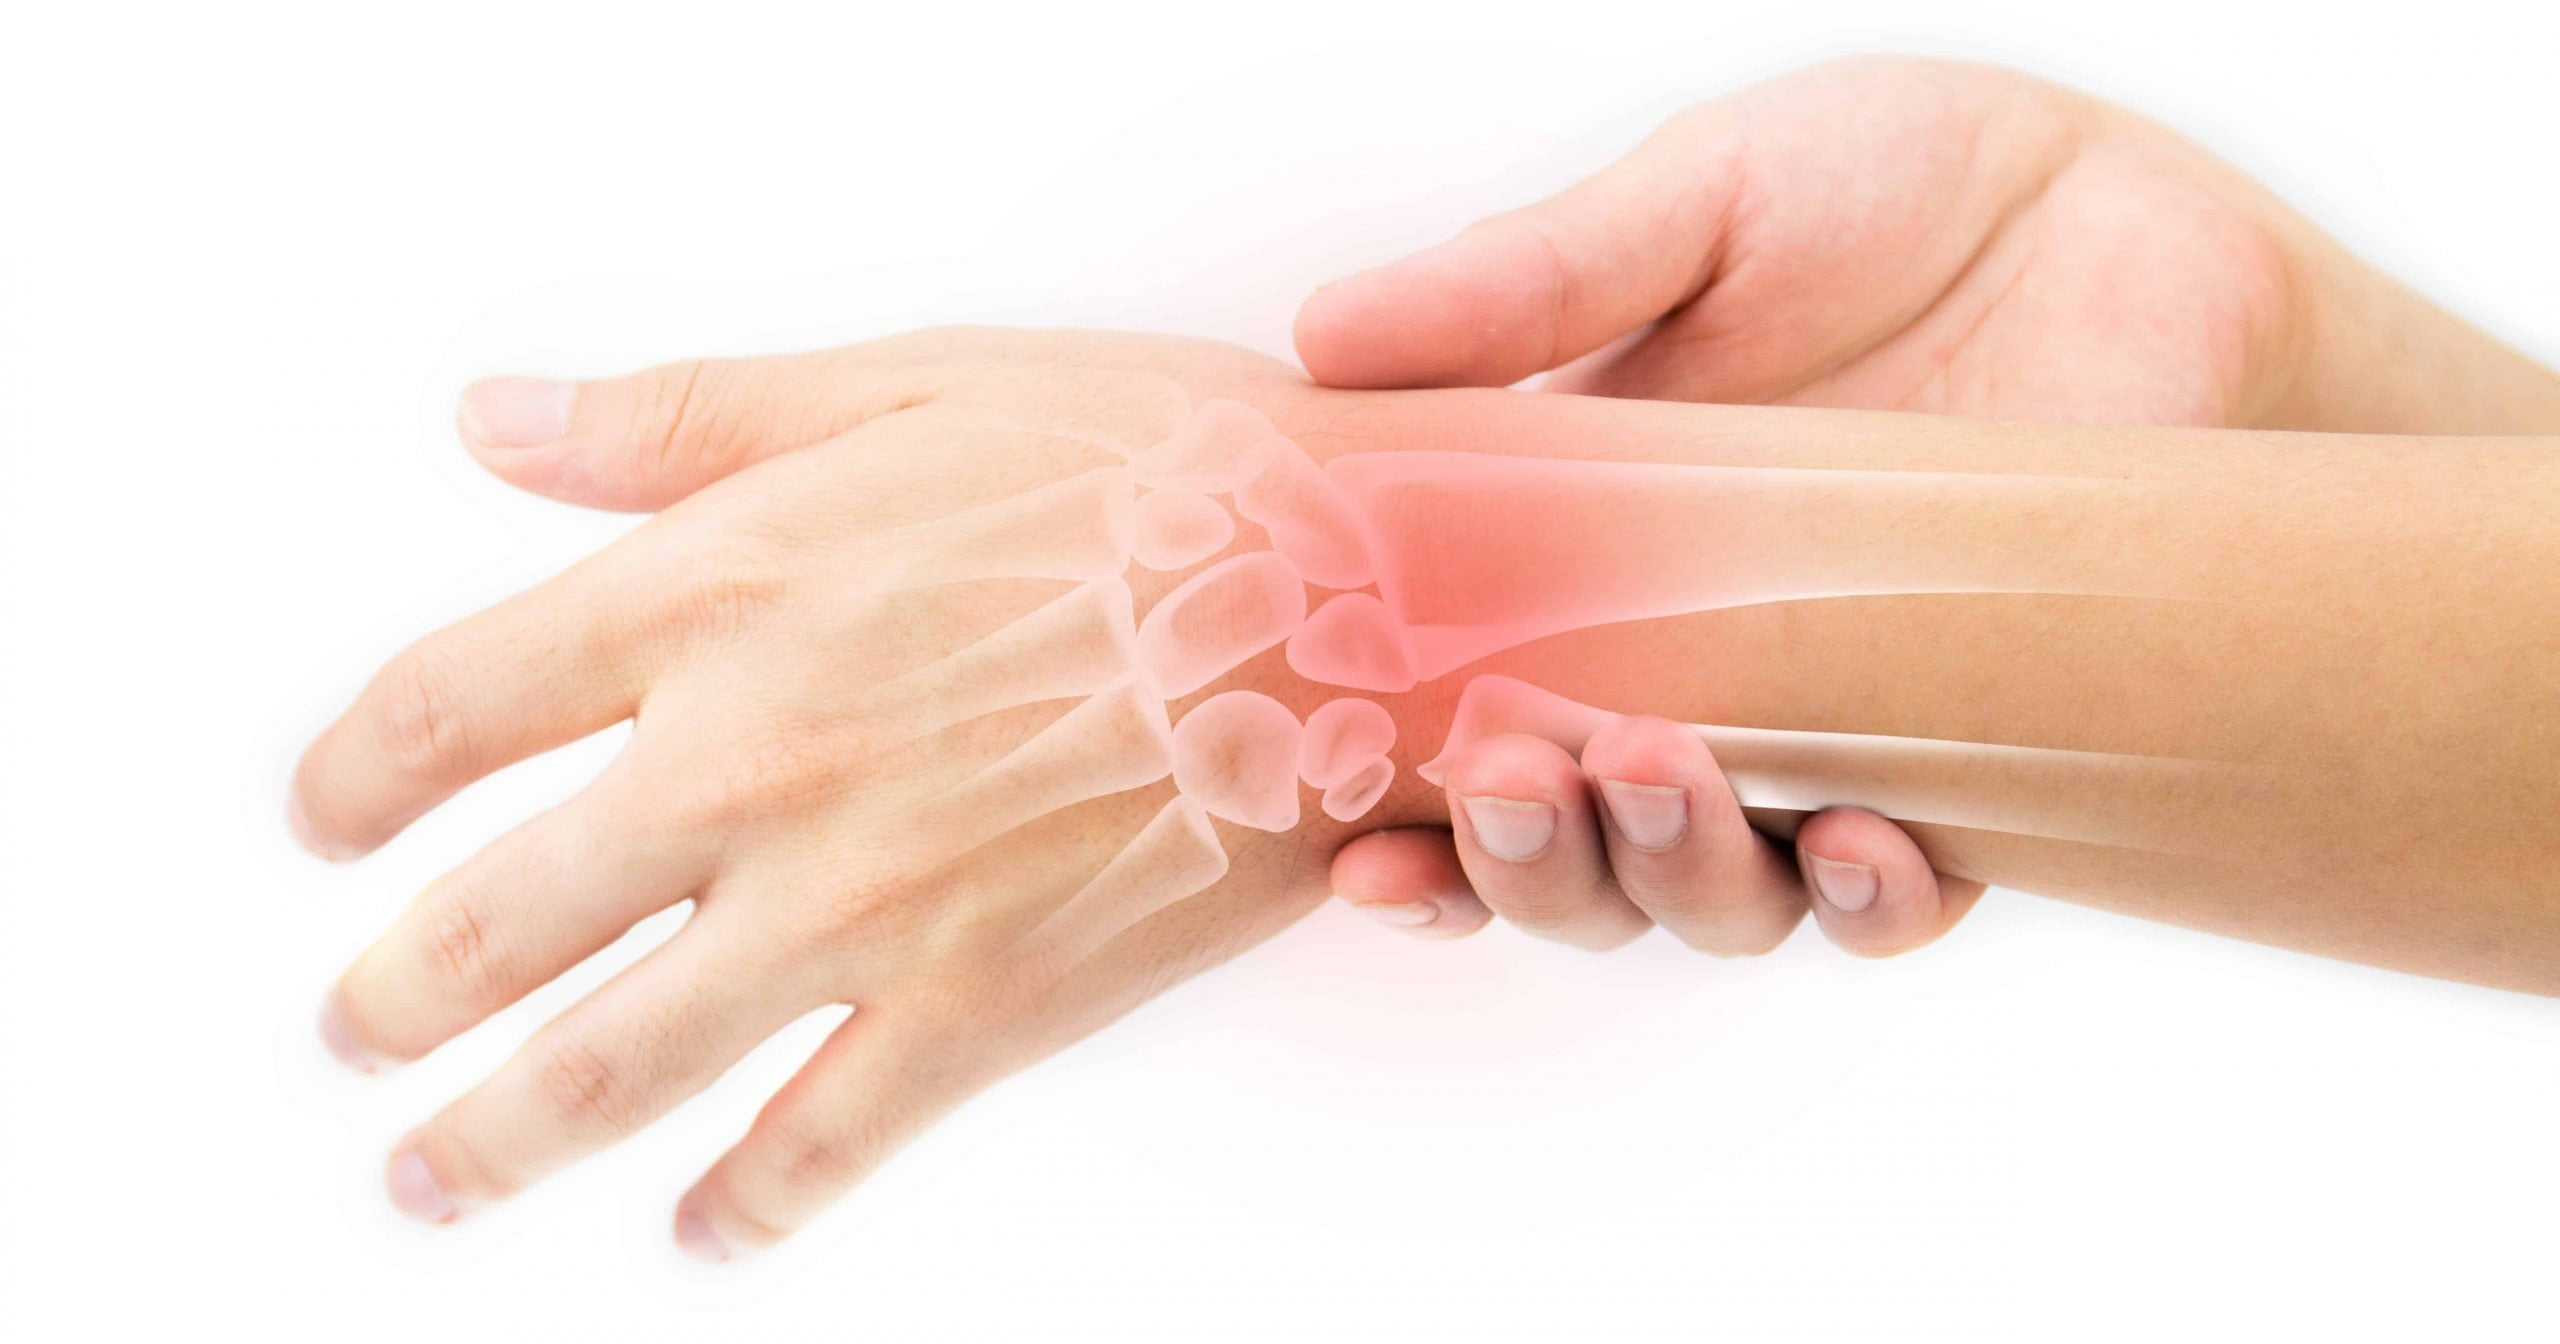 Workers’ Comp Benefits for Repetitive Strain Injuries